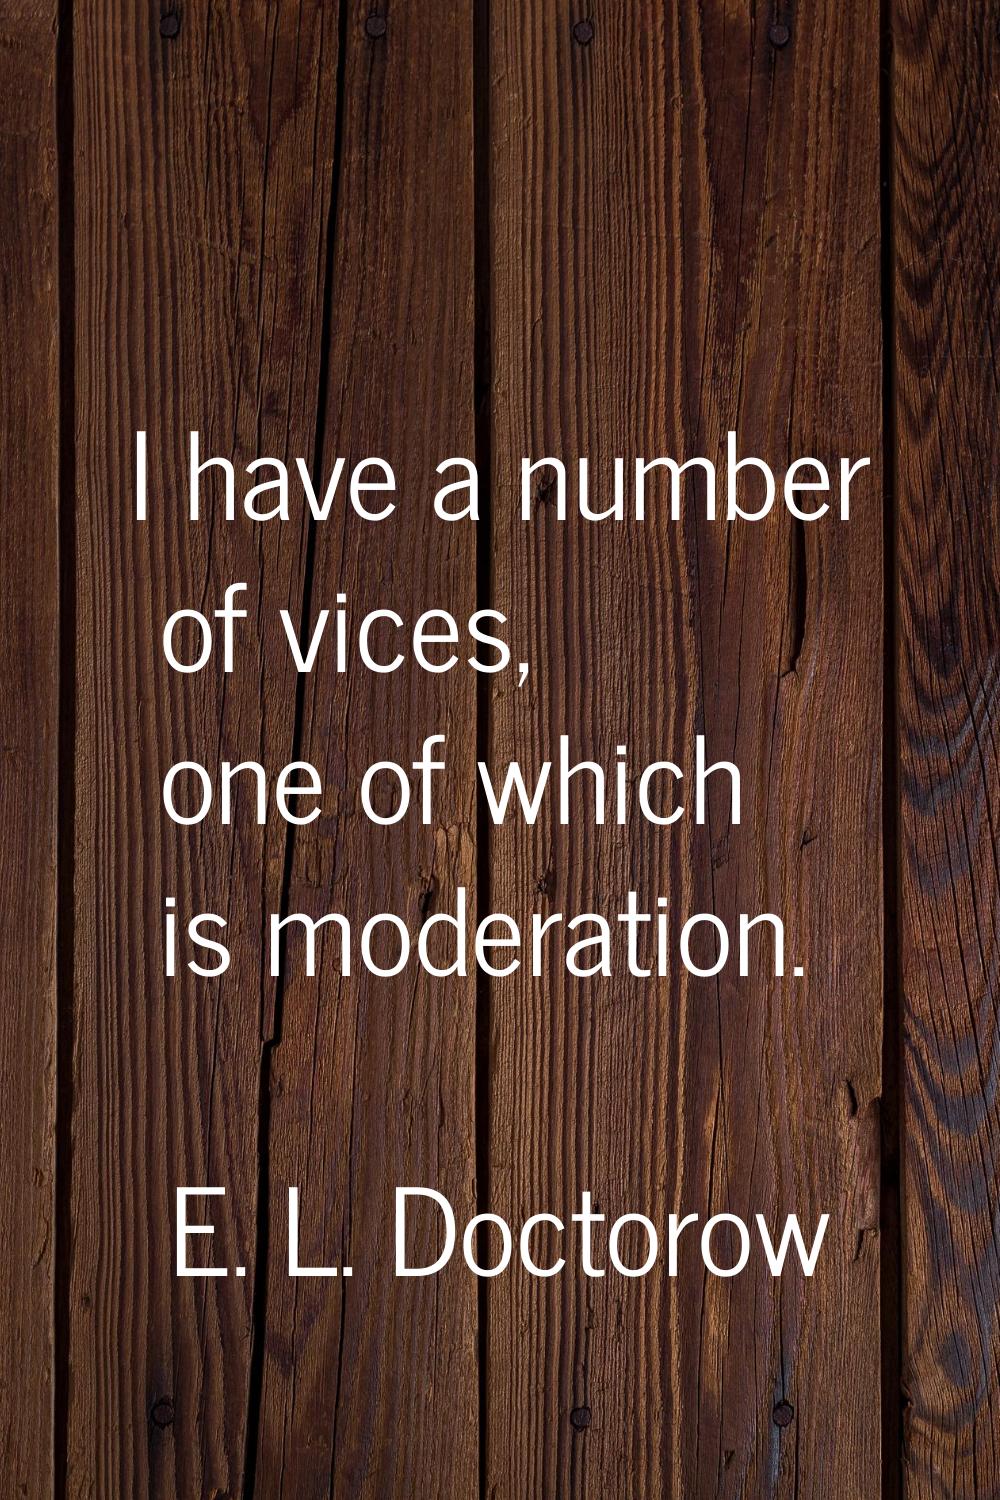 I have a number of vices, one of which is moderation.